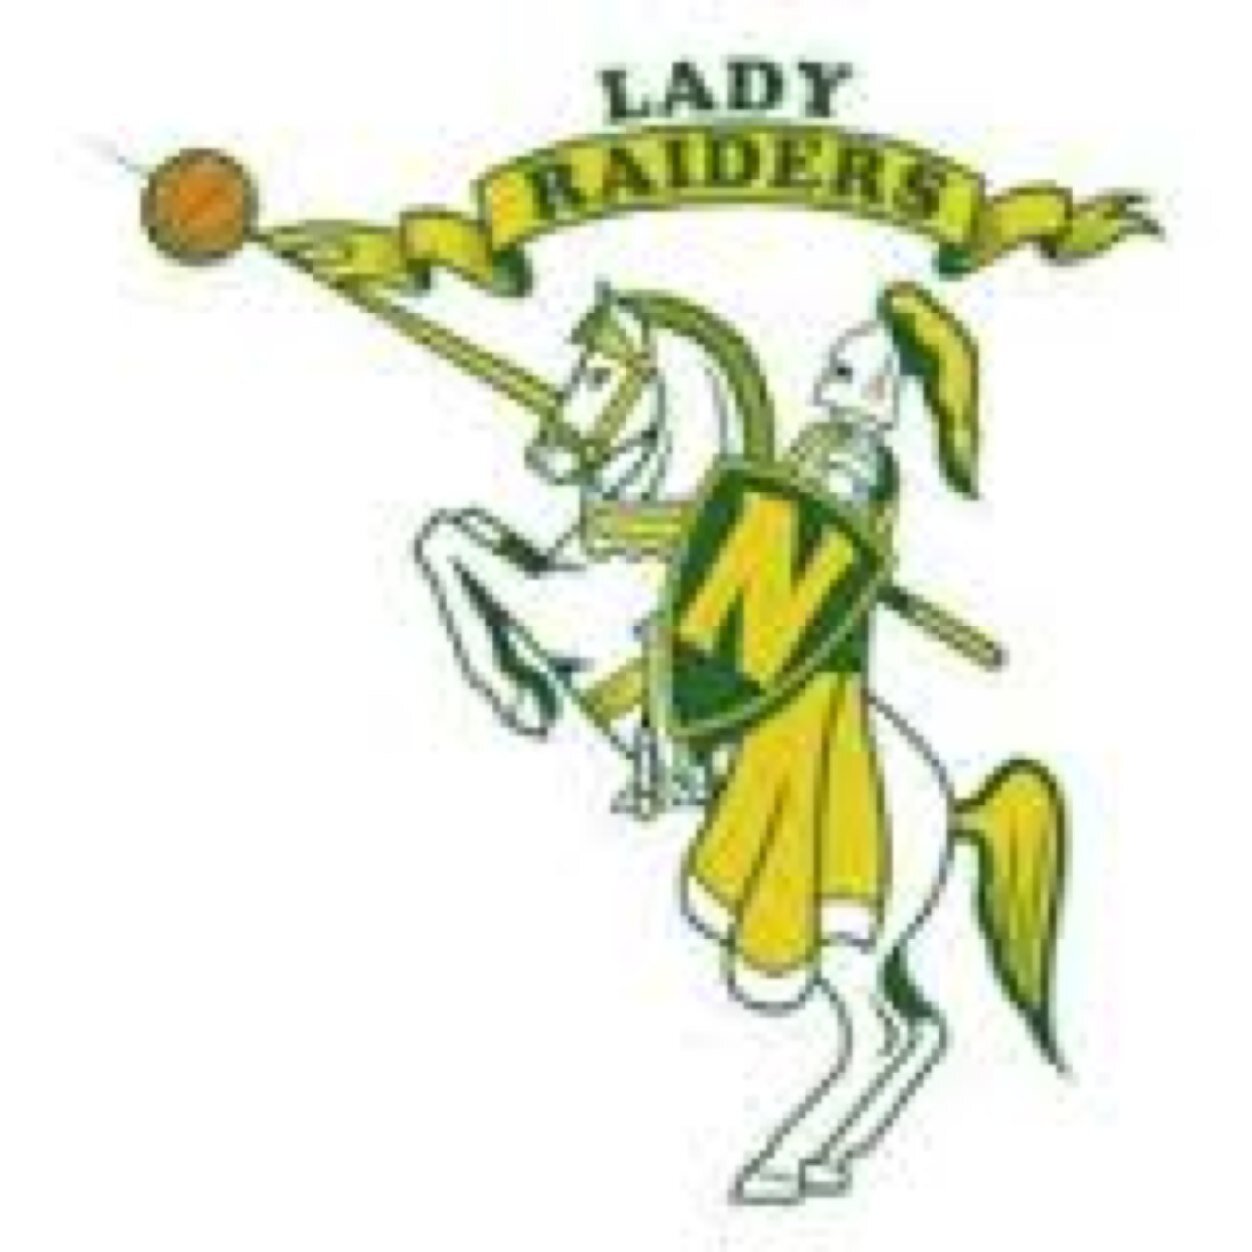 Team and player updates for the Northridge High School Lady Raiders 🔰🏀__________________ Family | Accountability | Passion | Selfless